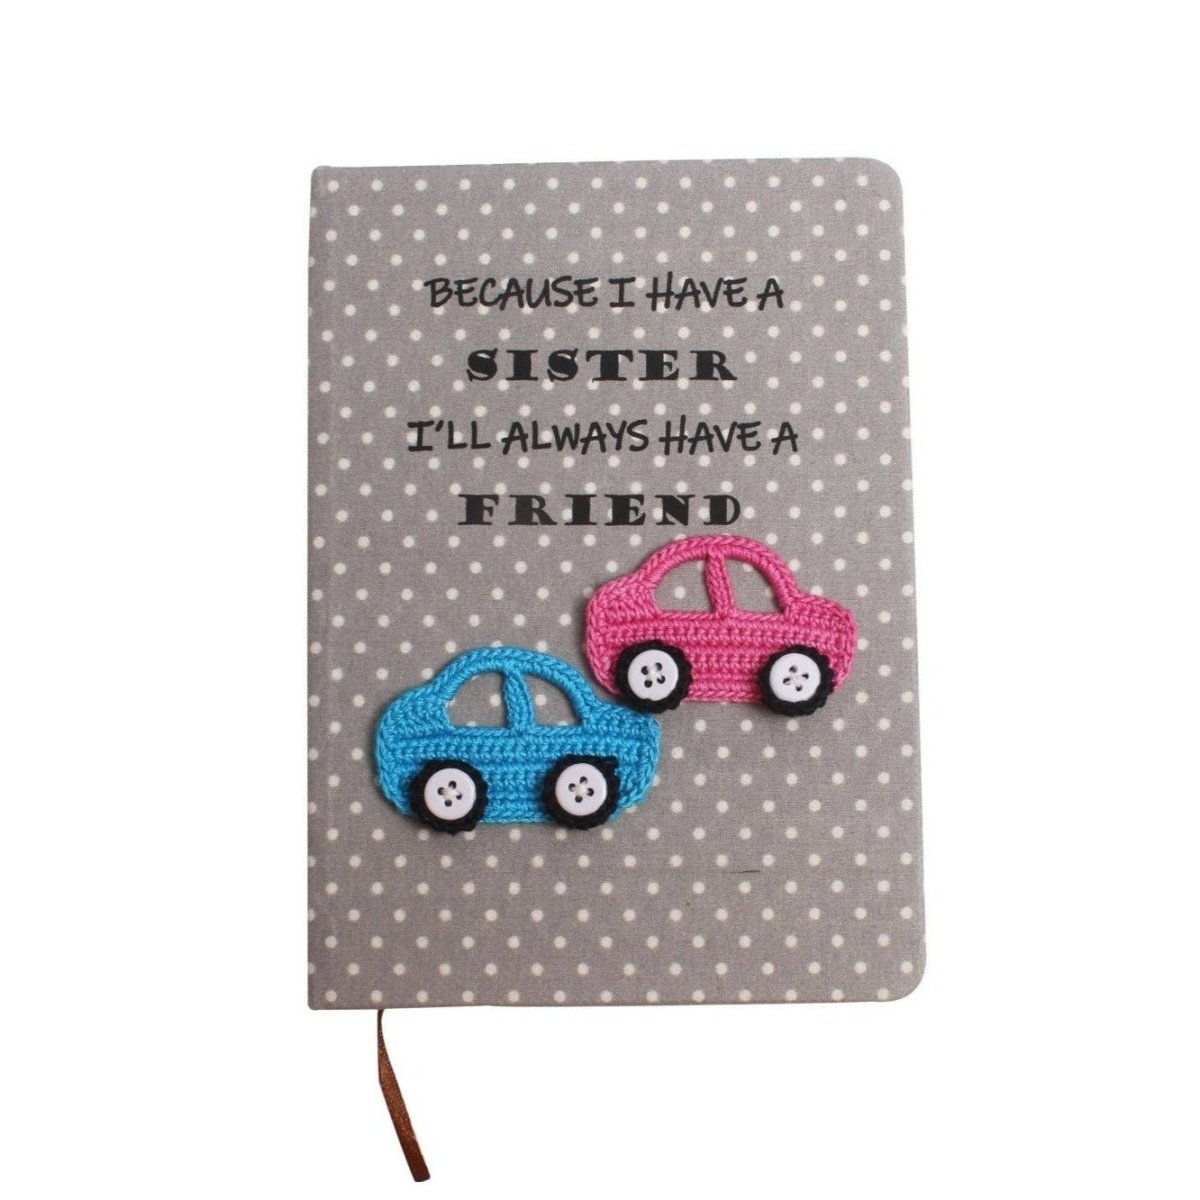 Cute Diary with Crochet Embellished Cars Motifs - CRMD0869